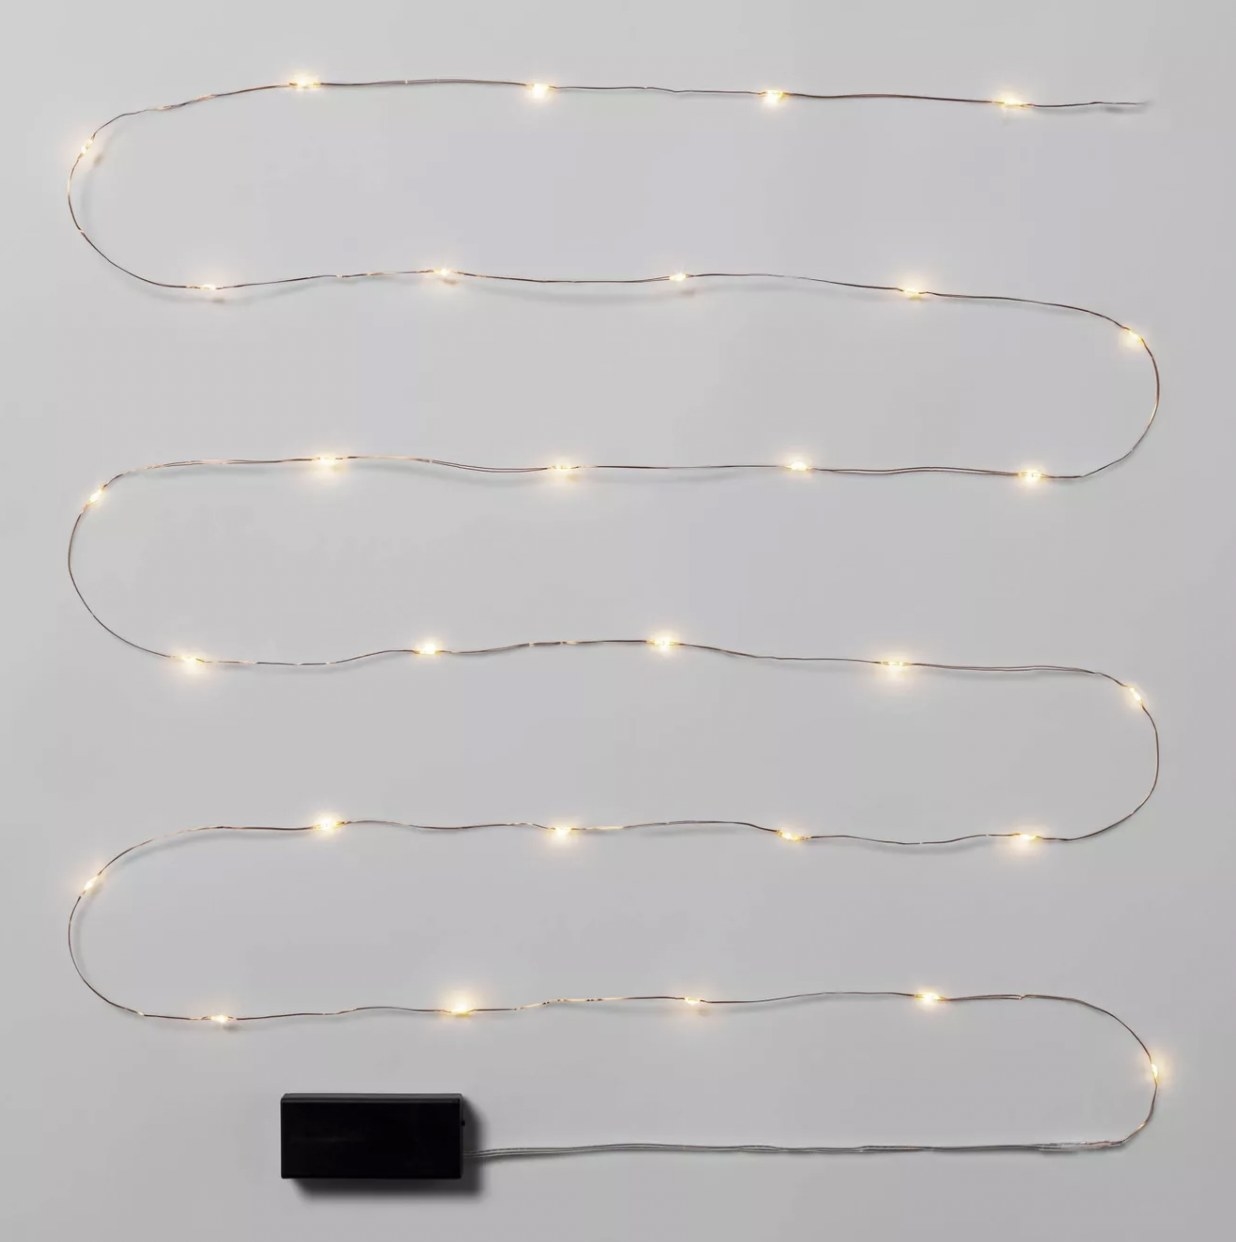 a string of battery-operated string lights